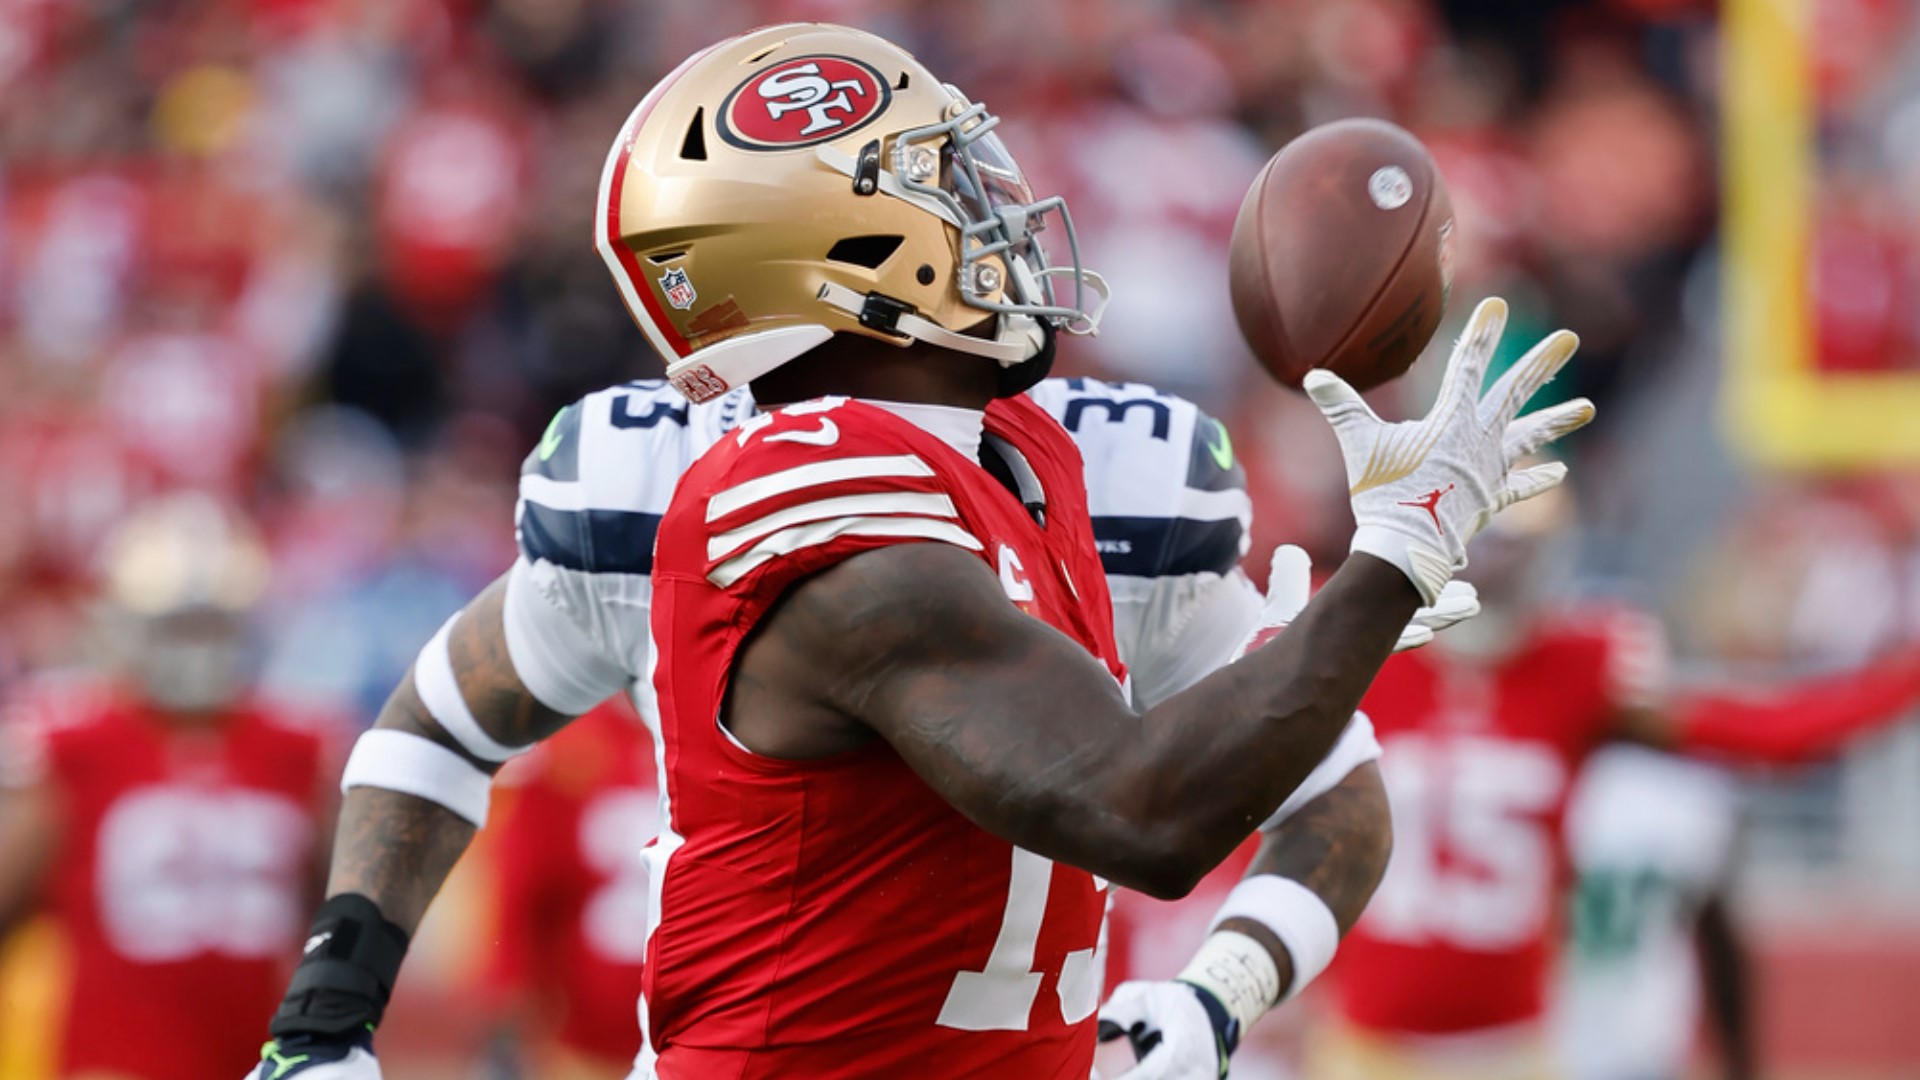 The Seahawks allowed the 49ers to gain over 500 yards of offense in the win.